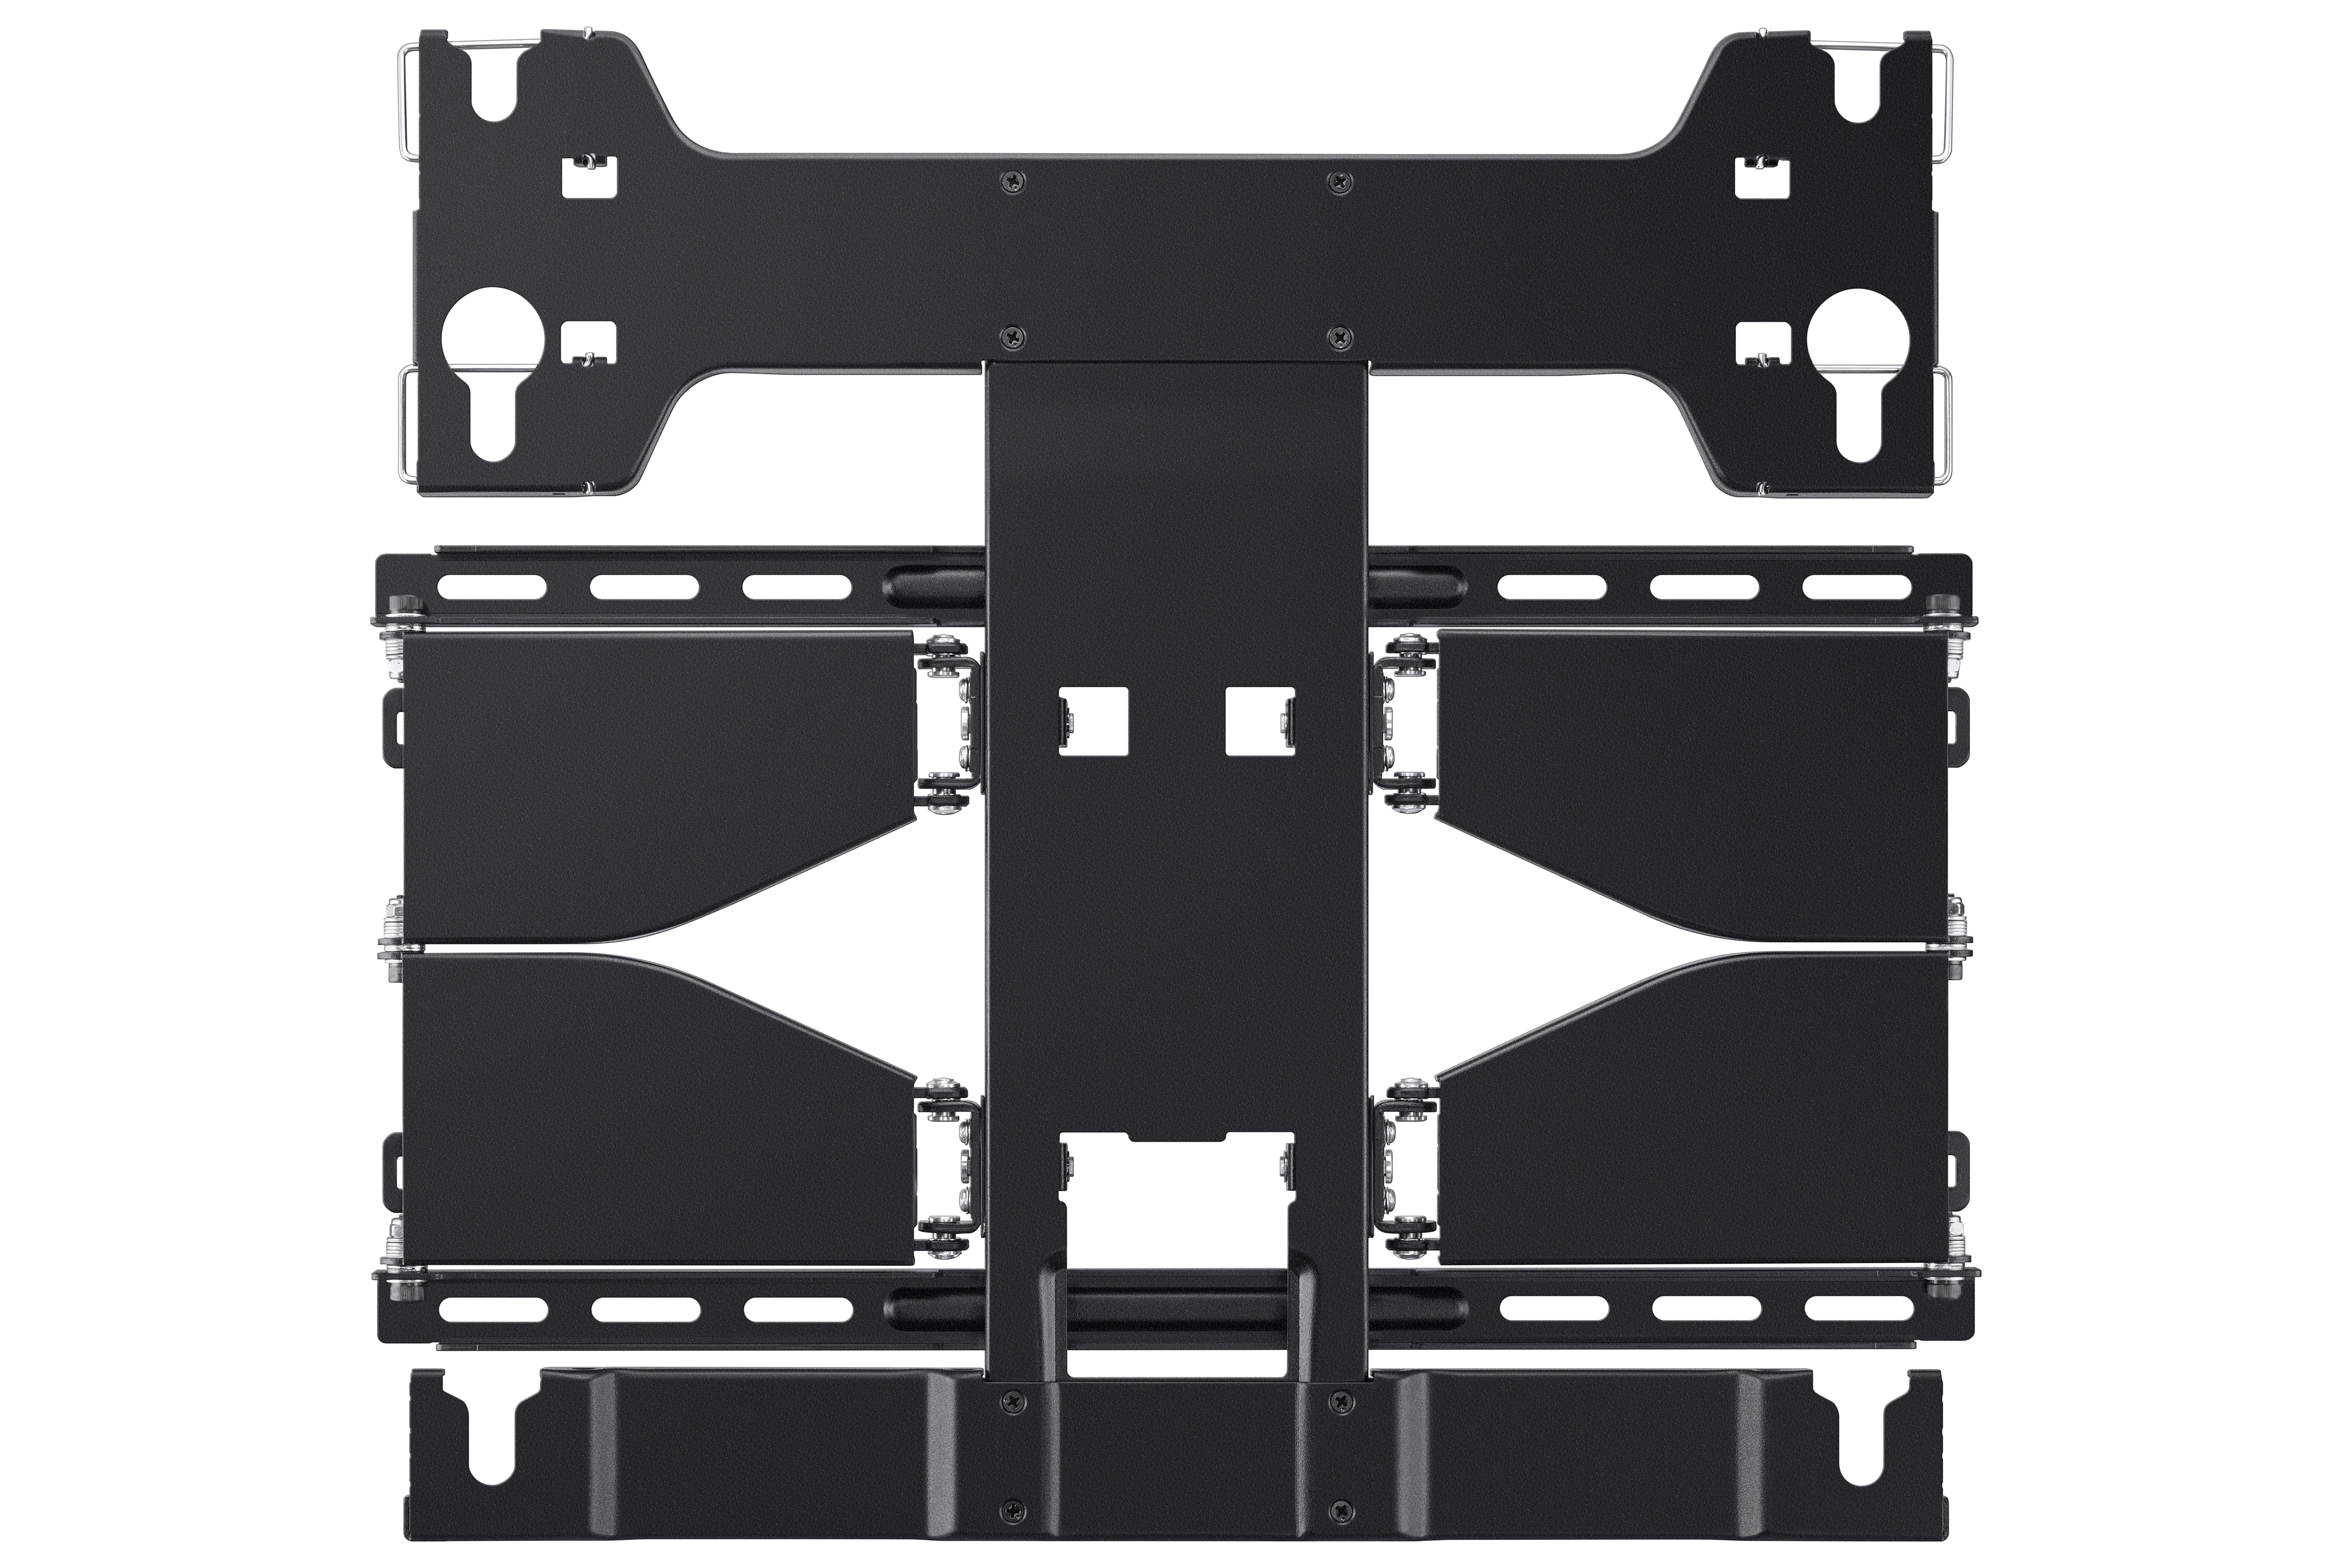 58 to 75-Inch Full Motion Slim TV Wall Mount